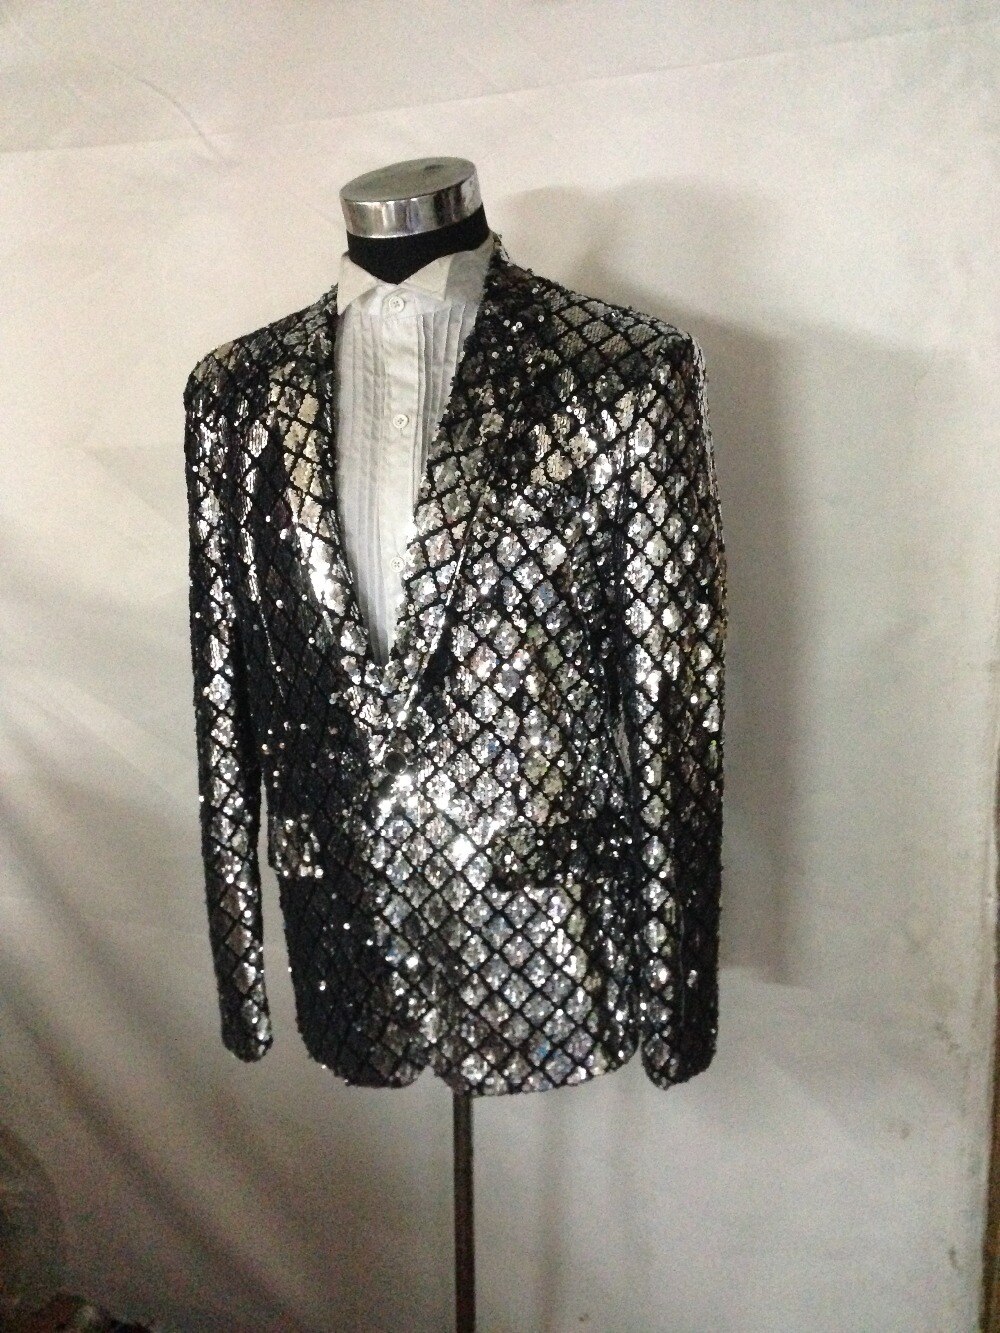    üũ  ü sequined    & ǹ handsewing sequined tuxedo jacket, only jacket